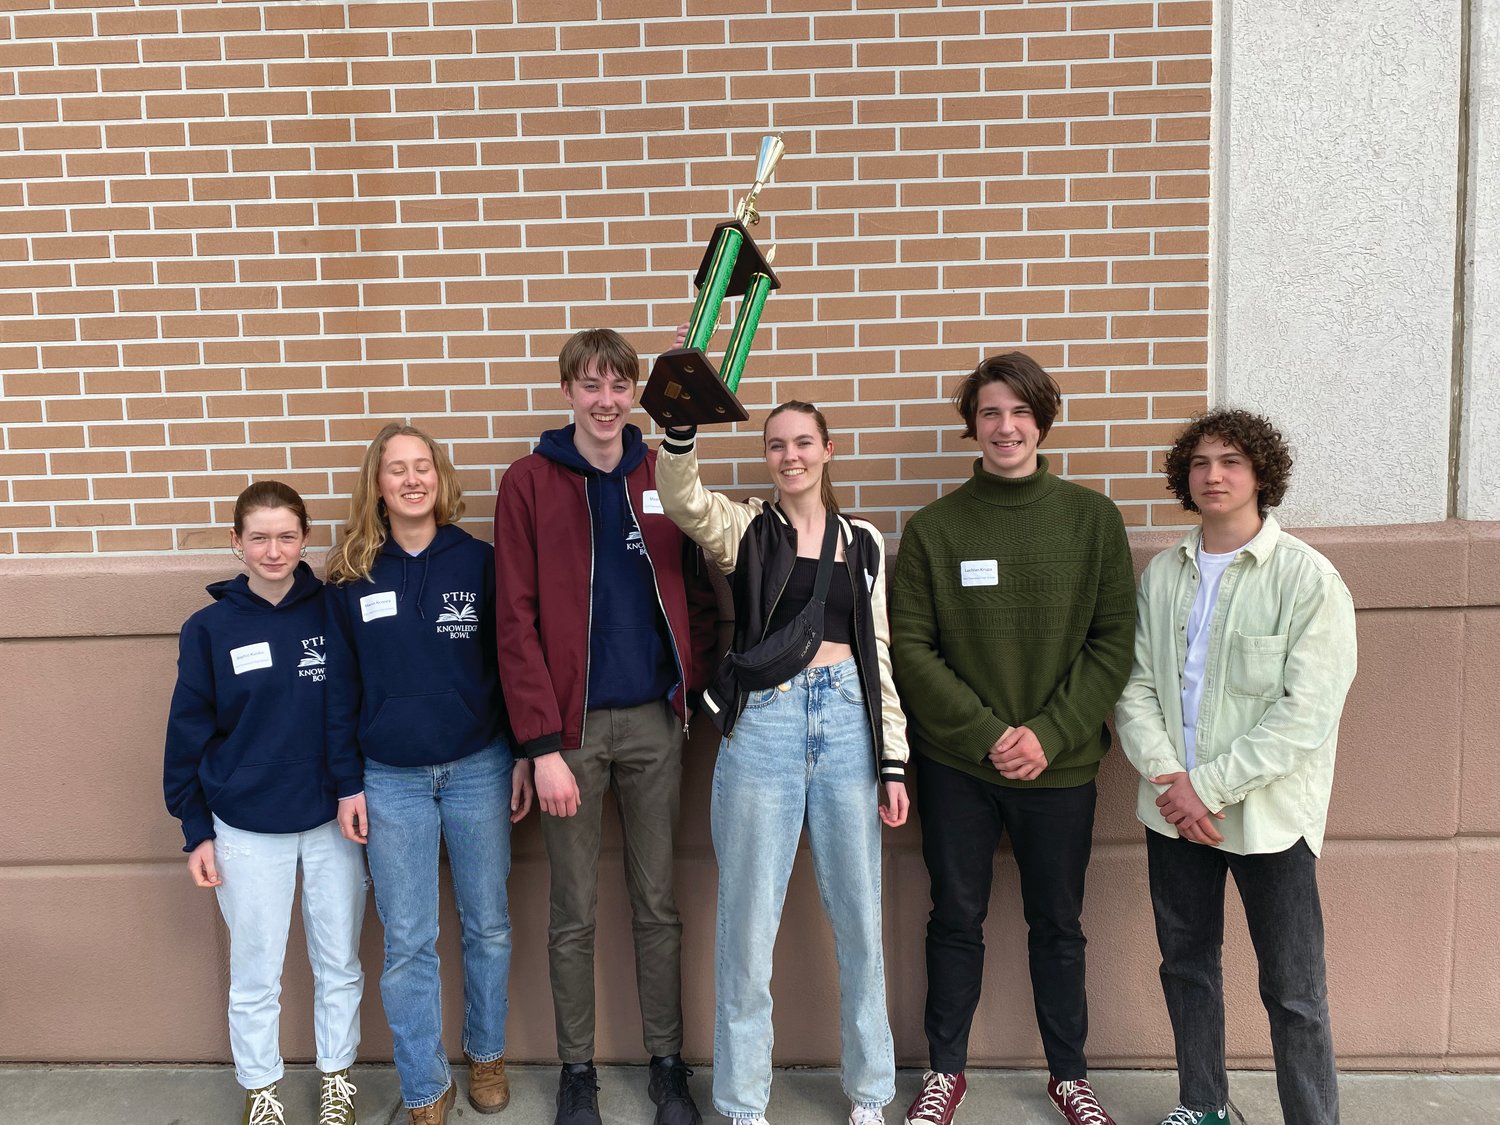 Port Townsend High School students Sophie Kunka, Maeve Kenney, Stuart Dow, Maya Dow, Lochlan Krupa, and Ashton Meyer-Bibbins celebrate with the second-place trophy after the Knowledge Bowl competition in Richland.